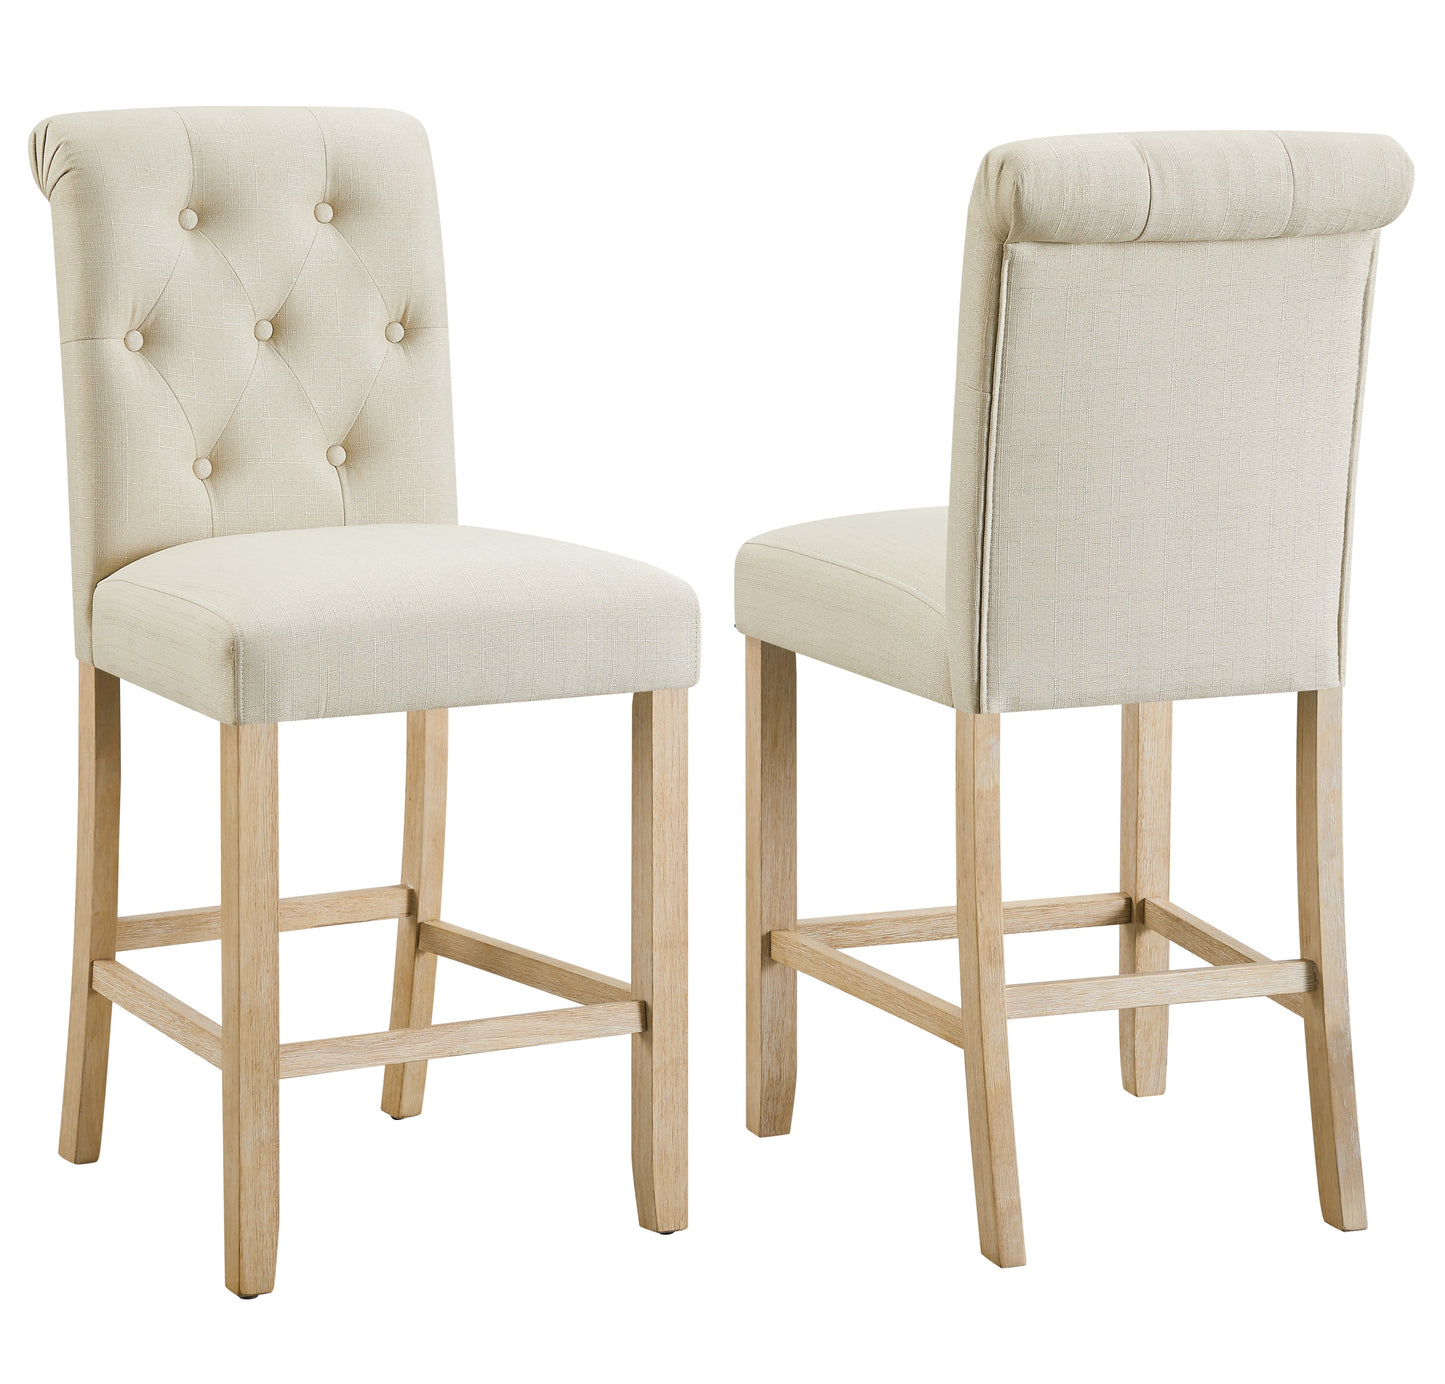 Siena Counter Height Button Tufted Back Solid Wood Stools, Set of 2, Tan